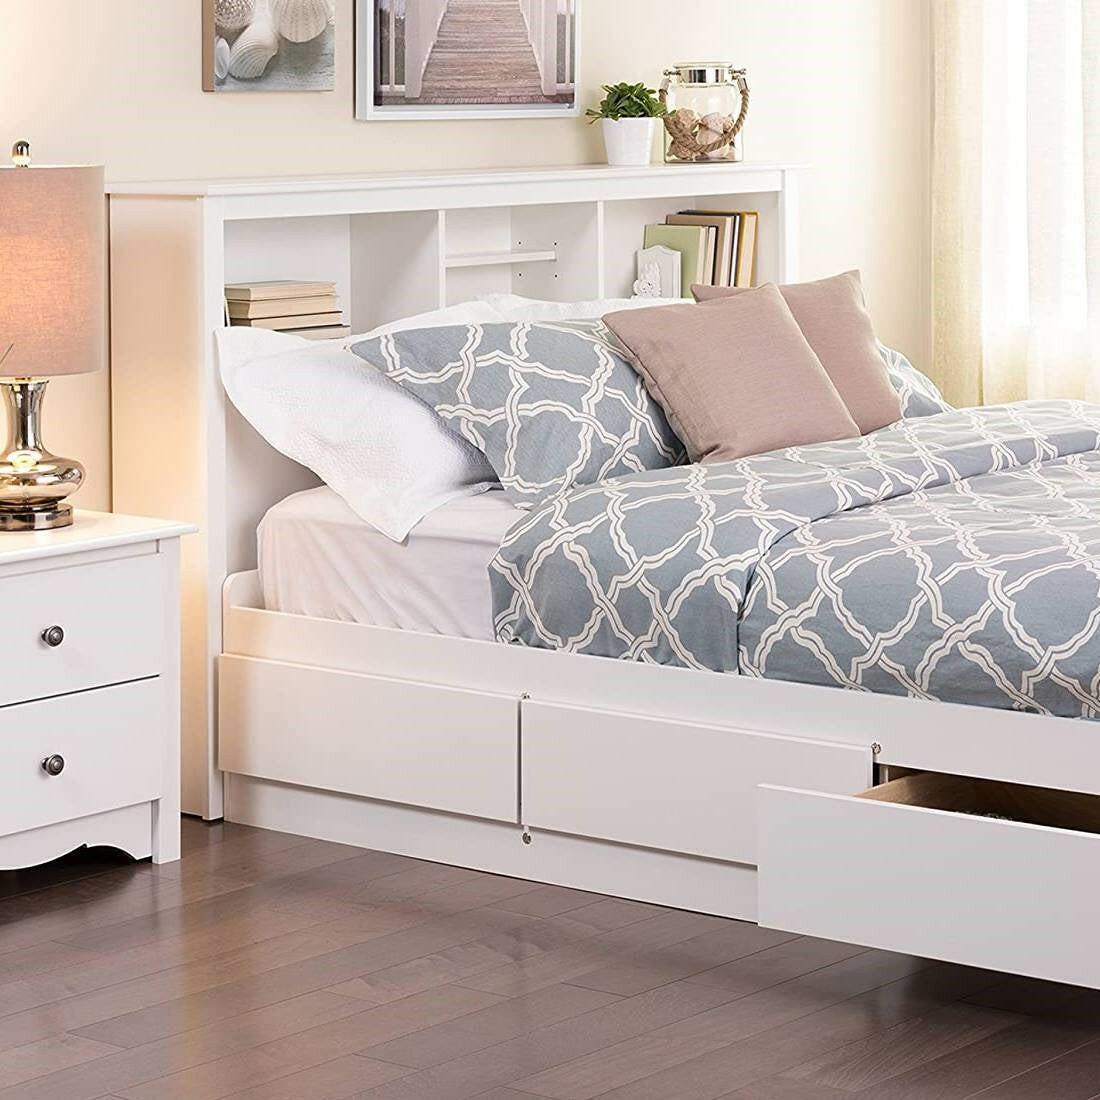 Full / Queen size Stylish Bookcase Headboard in White Wood Finish - FurniFindUSA